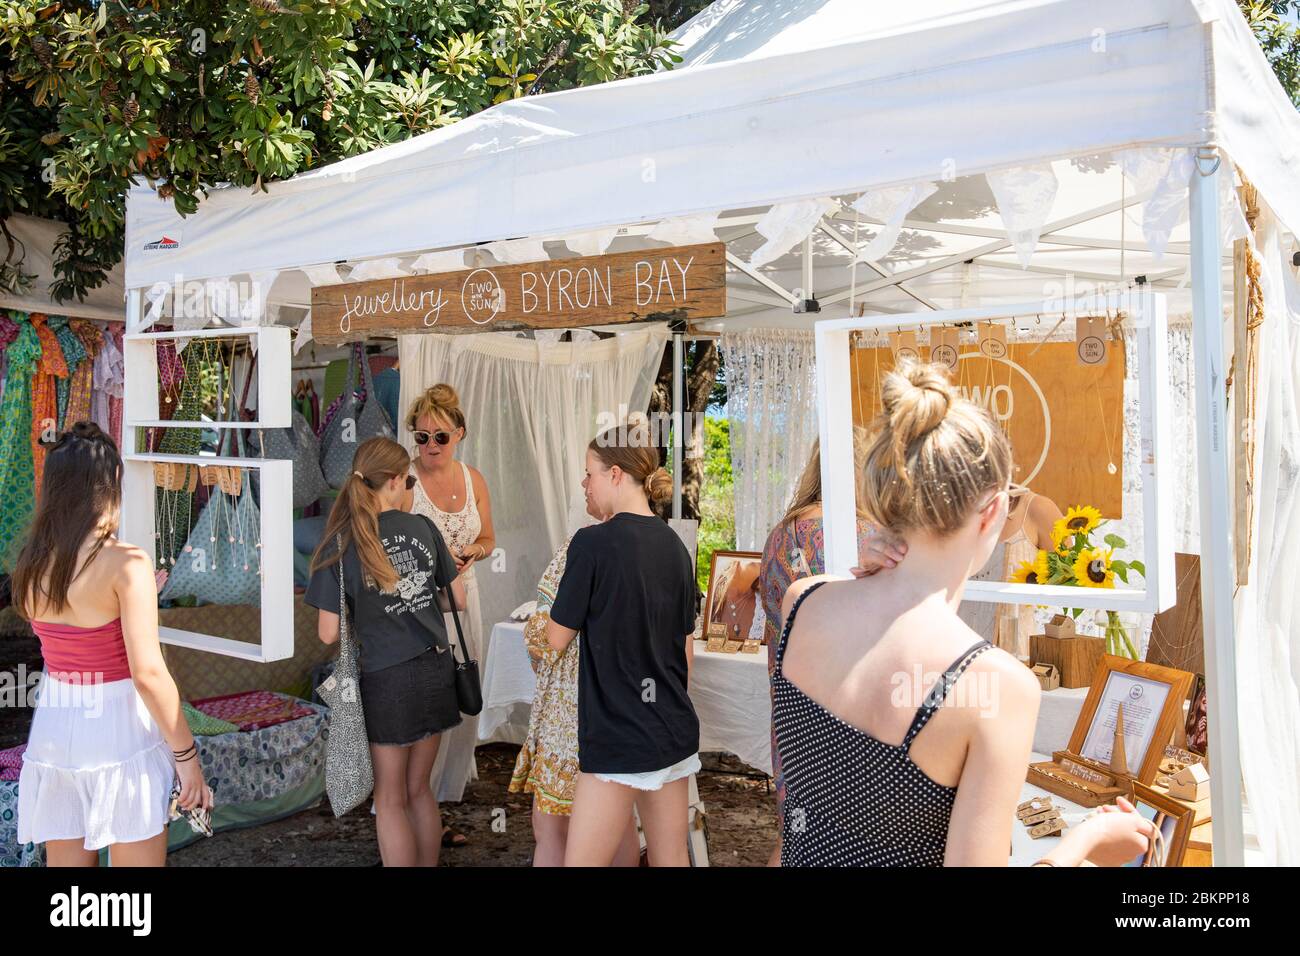 Byron Bay saturday market and young teenage girls trying on jewellery at a stall, New South Wales,Australia Stock Photo